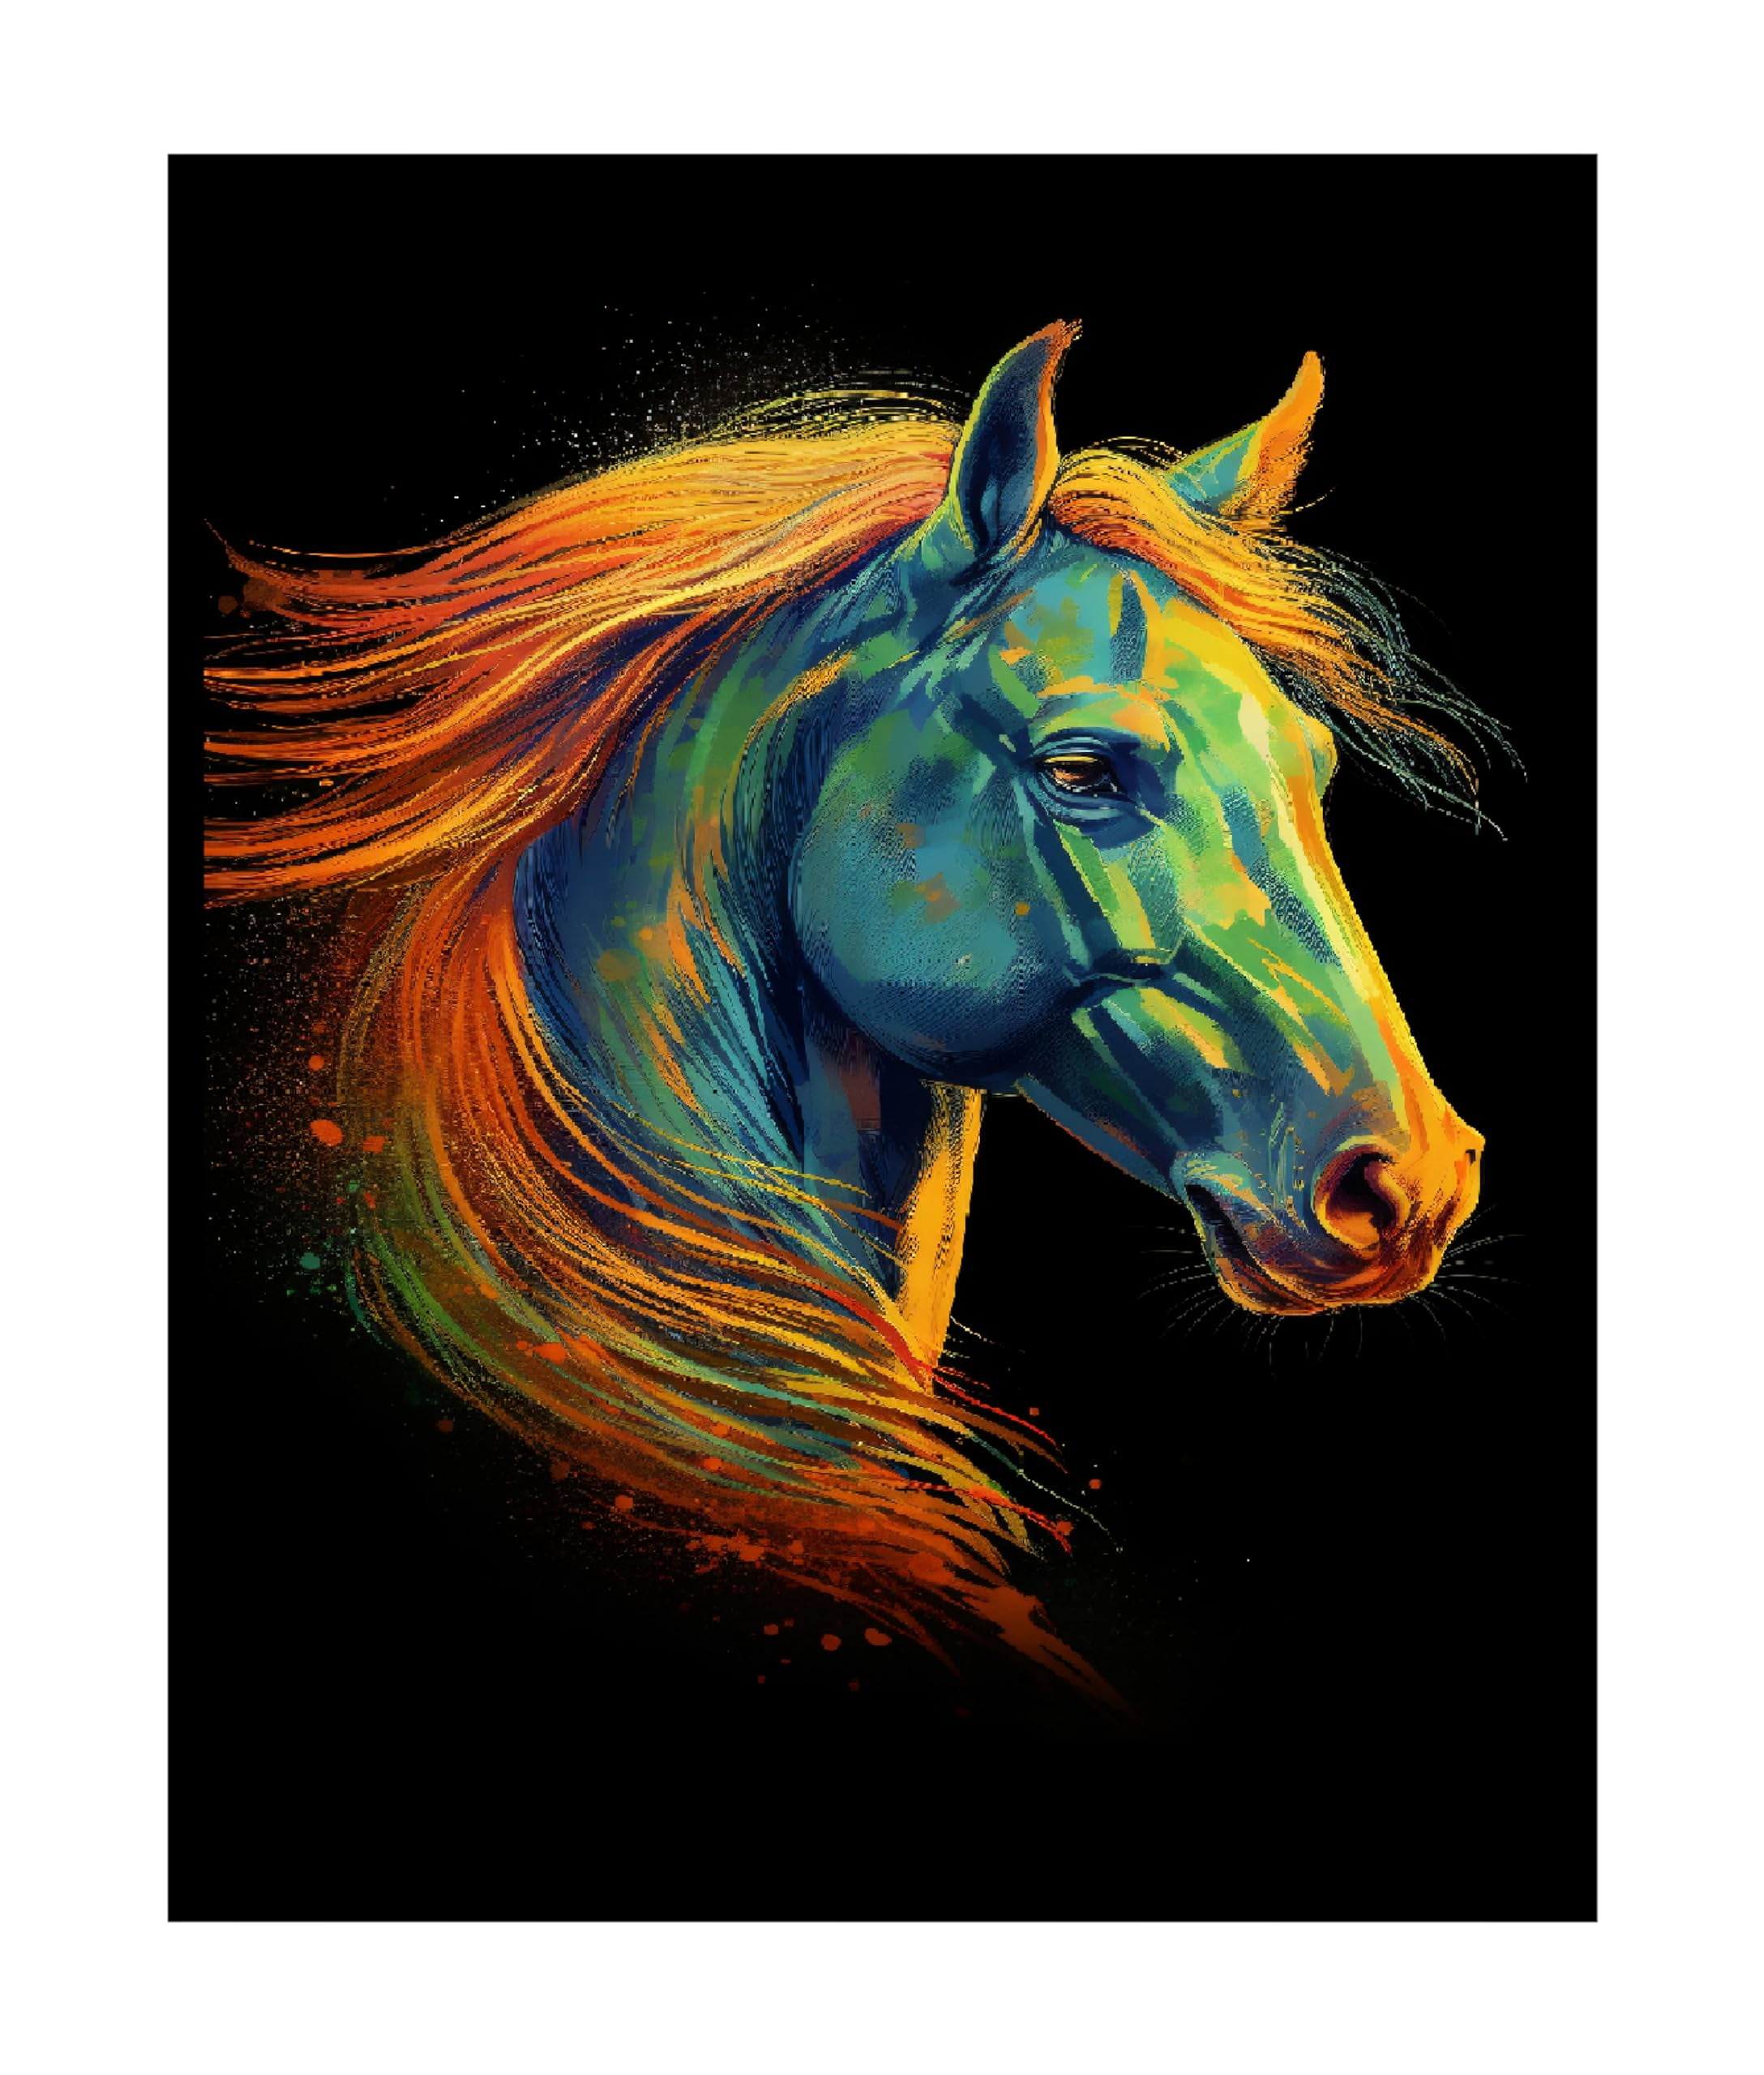 Horse Art / Horse Drawing / Gifts for Horse Lovers / Horse Wall